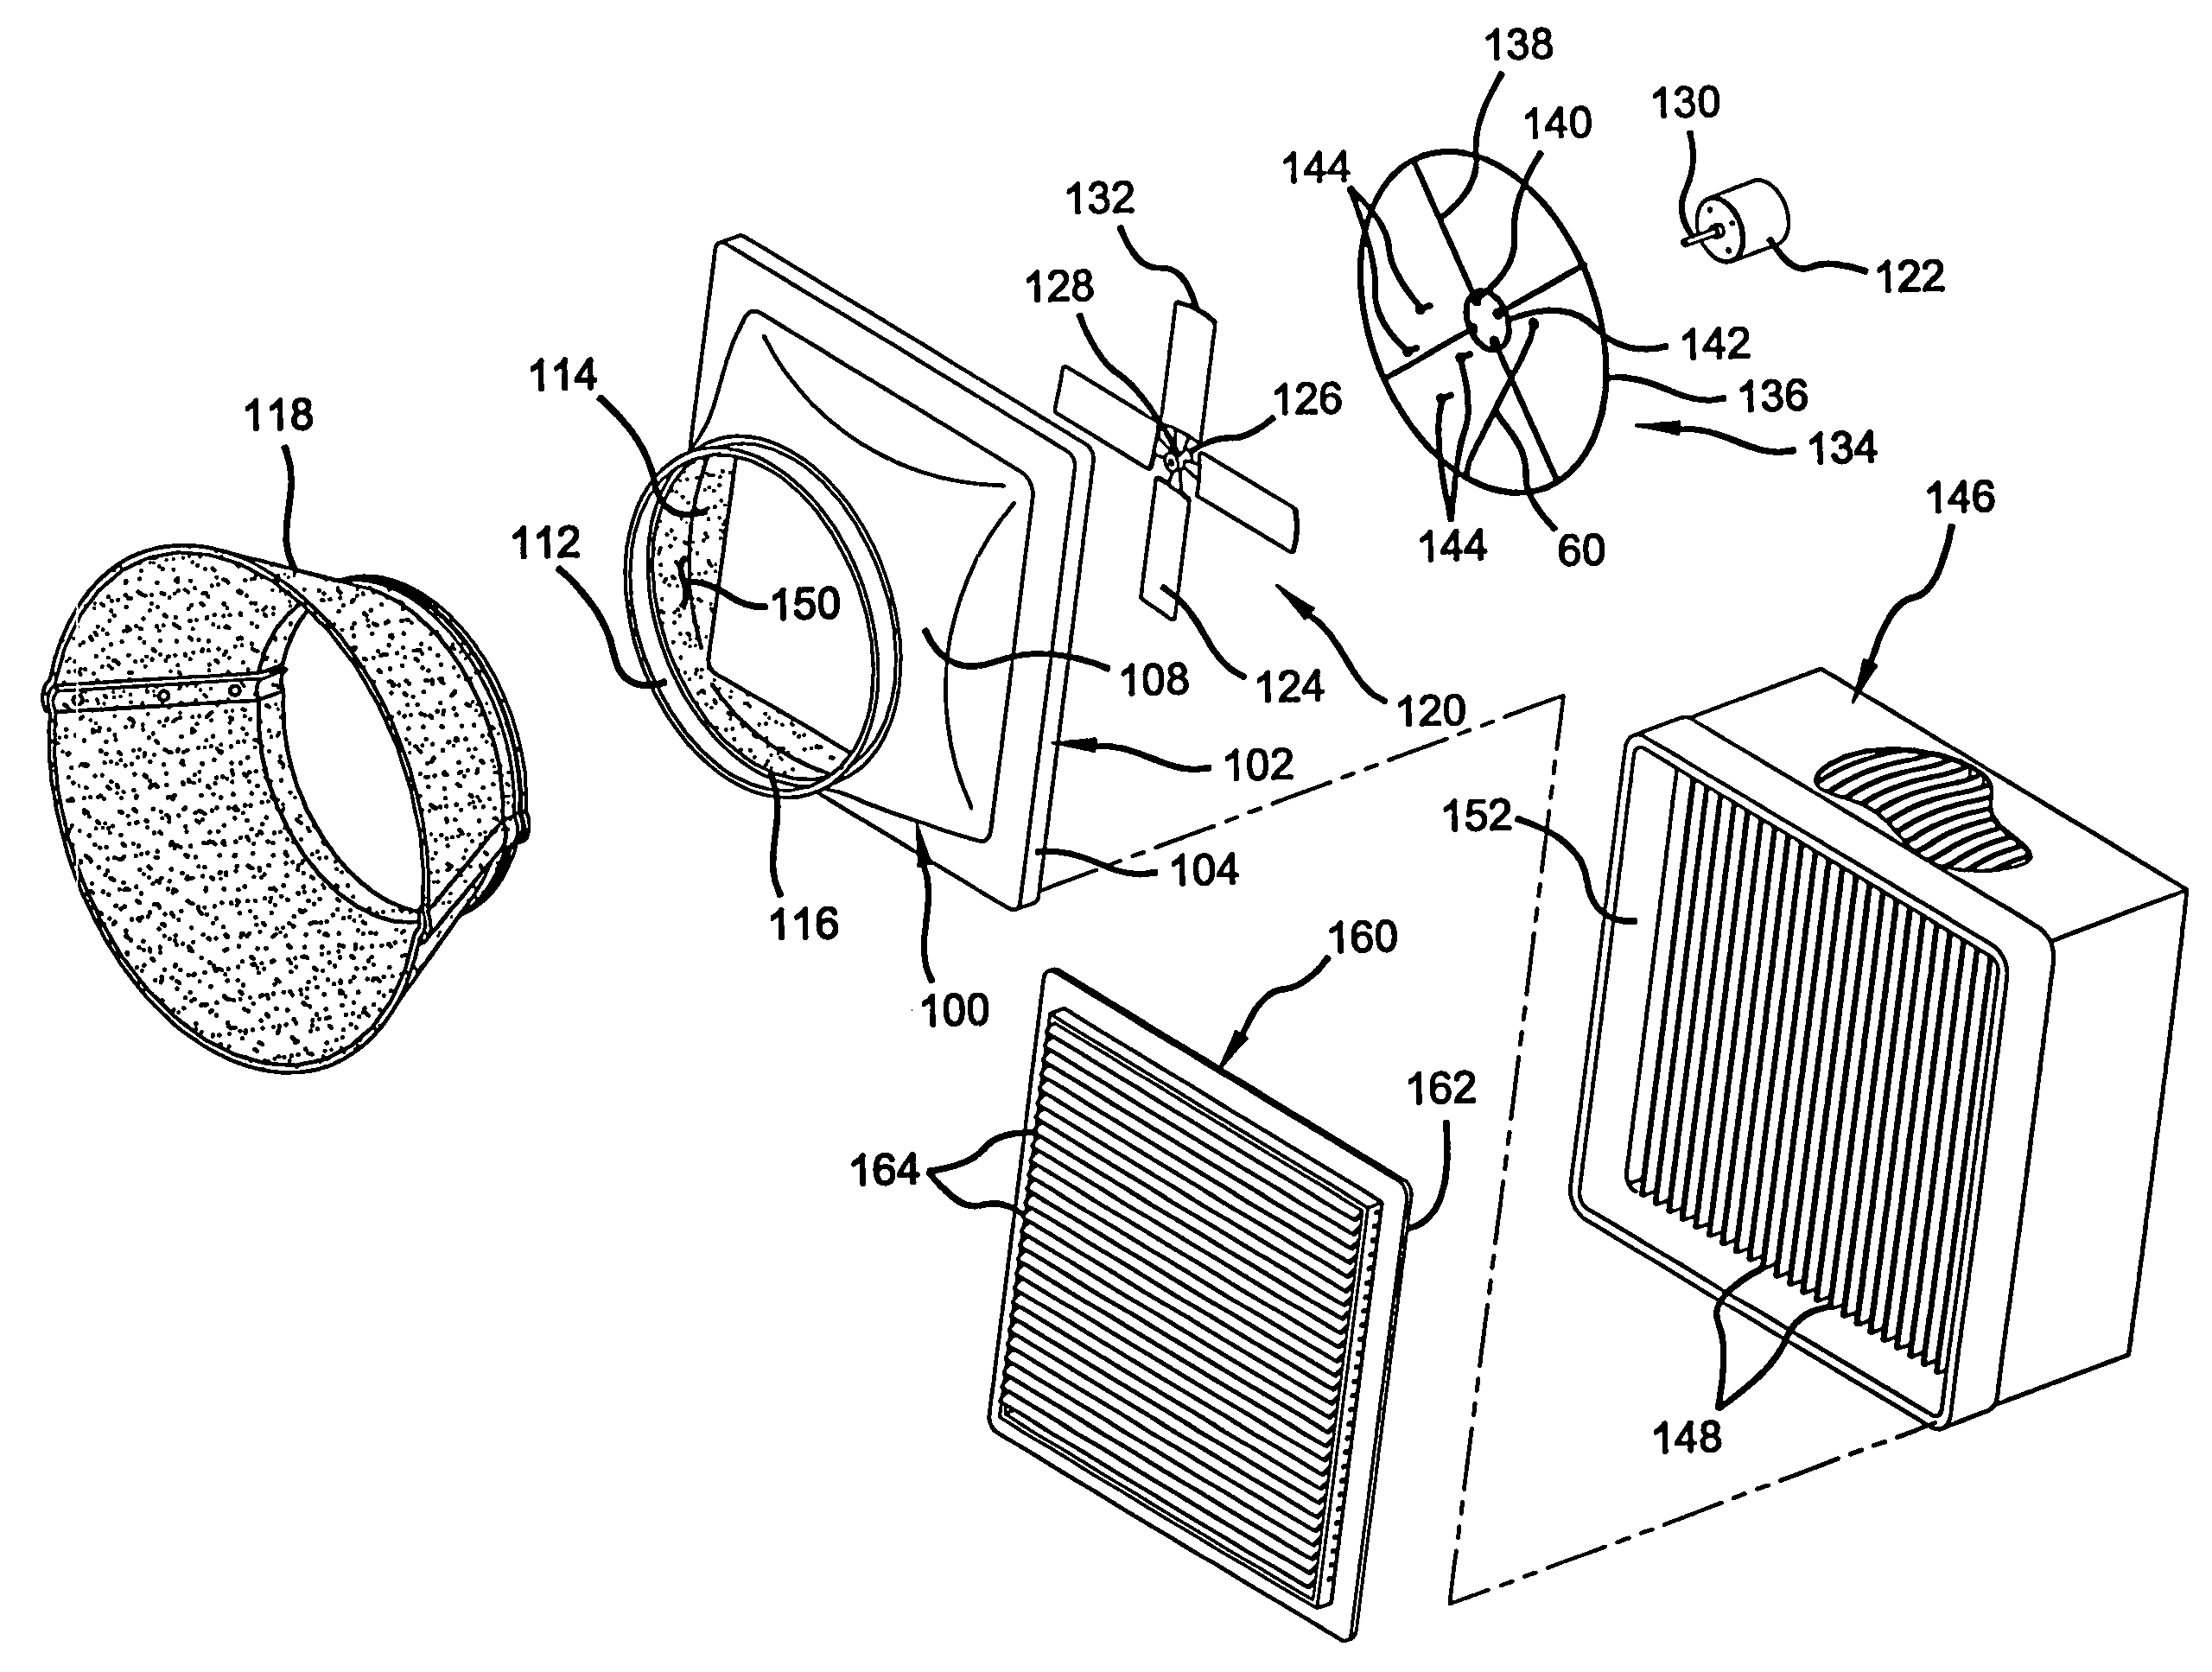 Method for enhancing poultry production